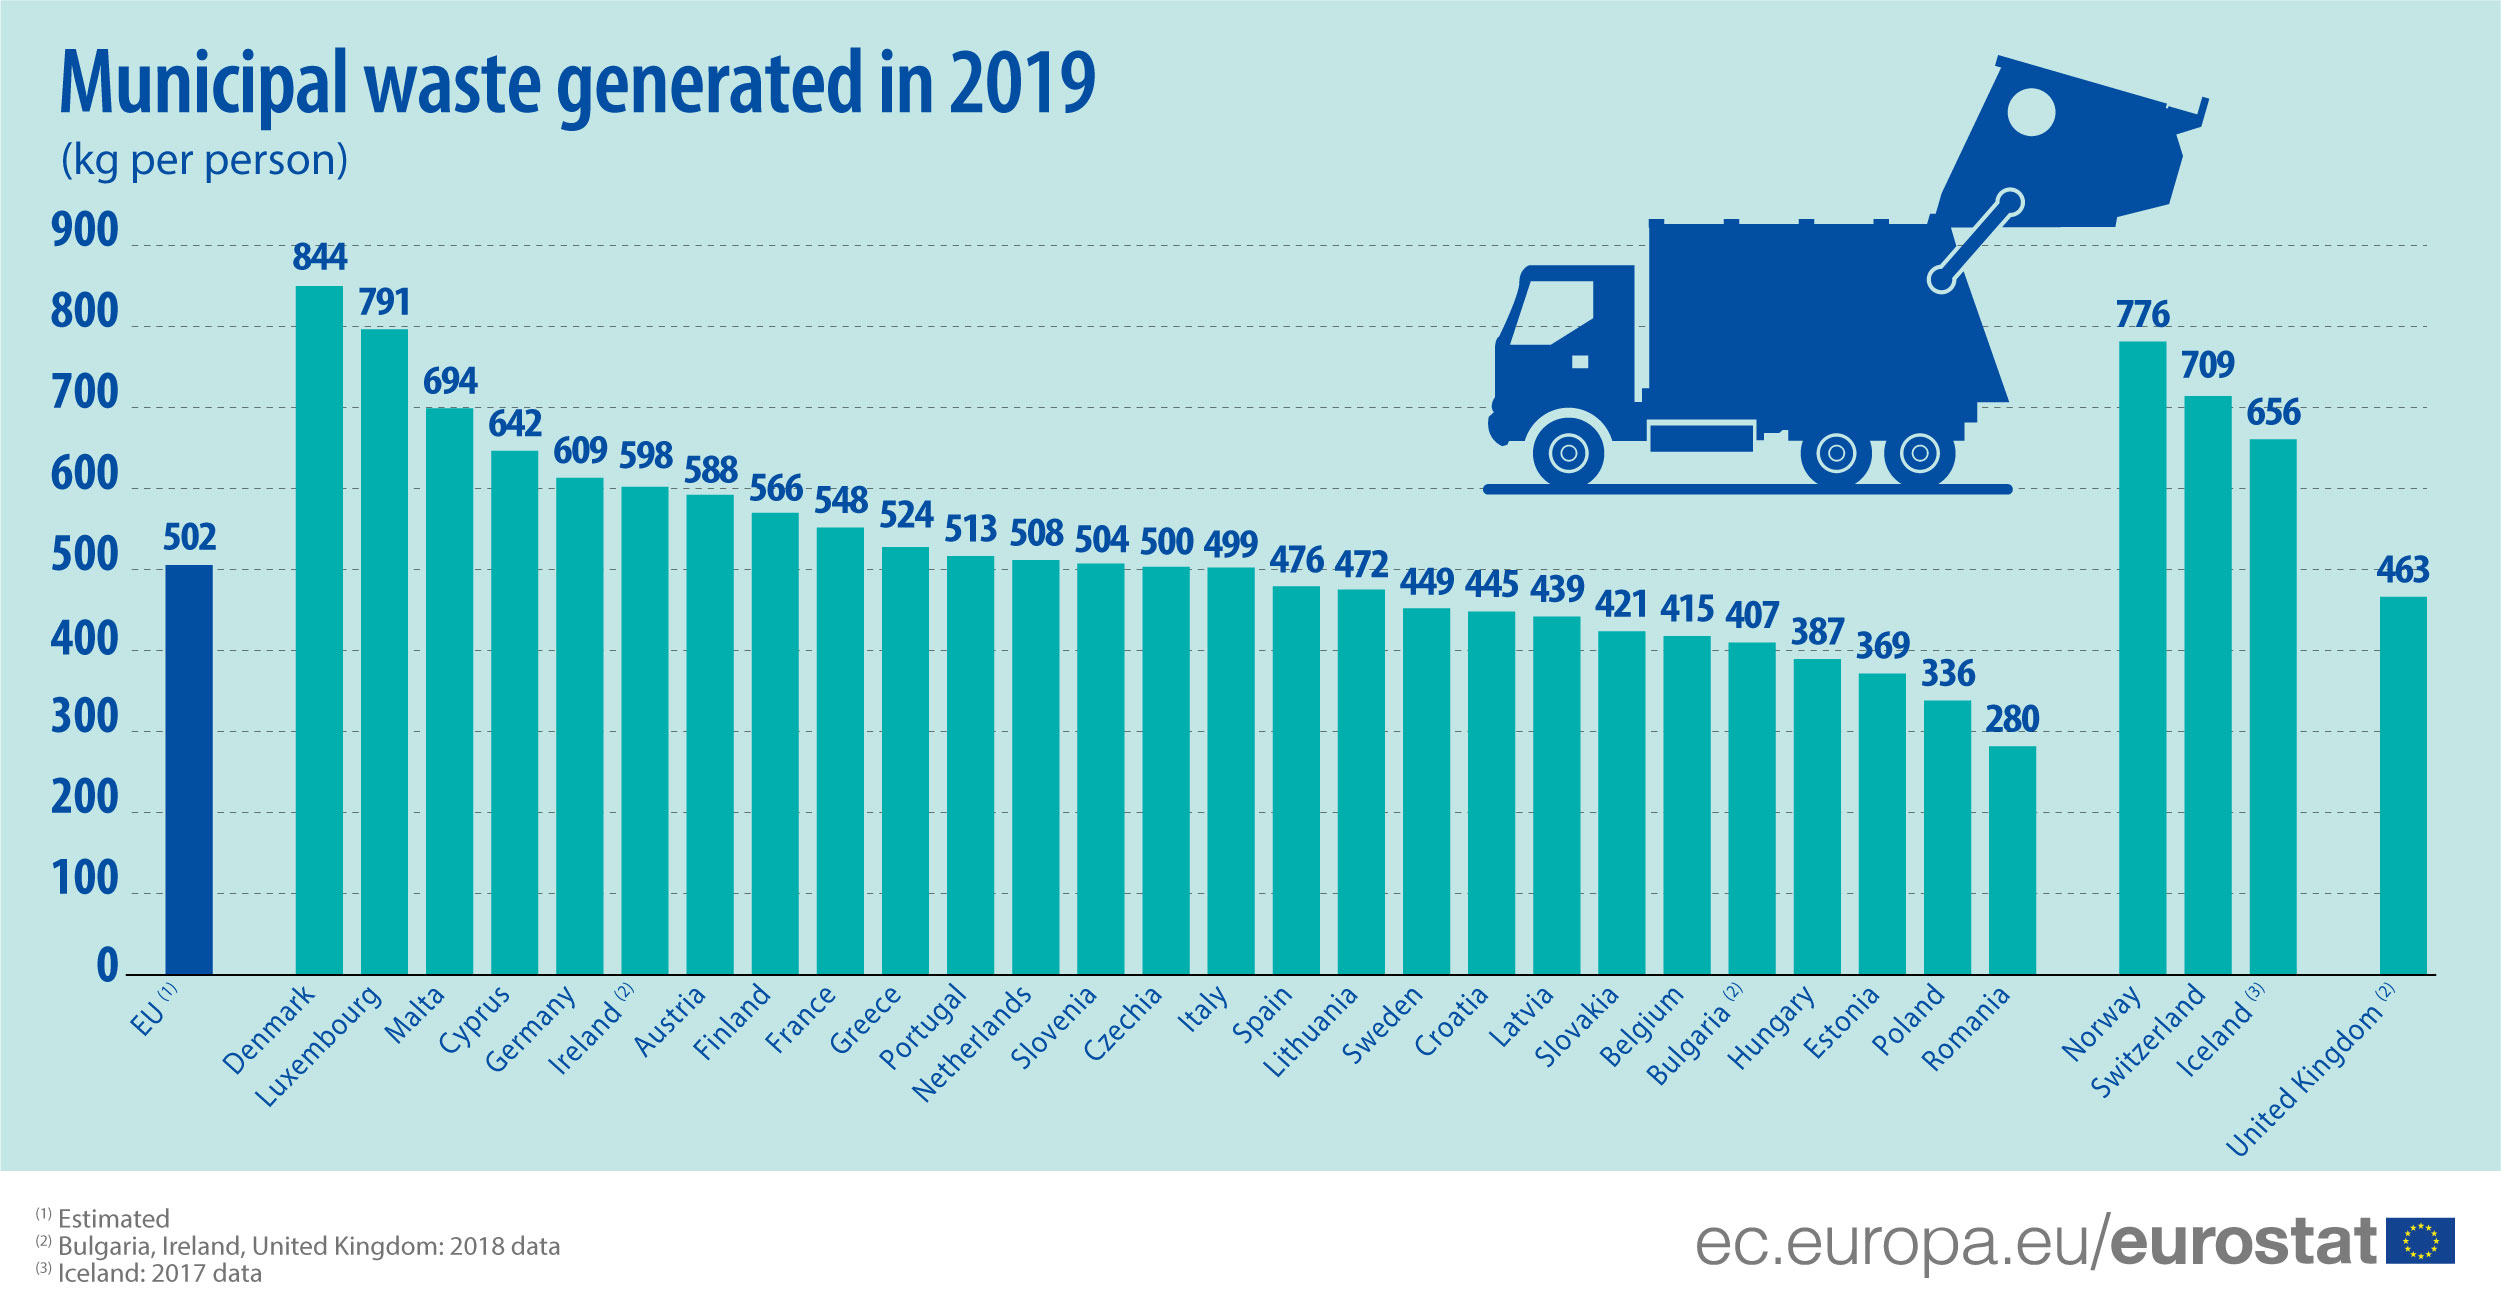 Half a tonne of municipal waste generated per person in the EU - Products Eurostat News - Eurostat